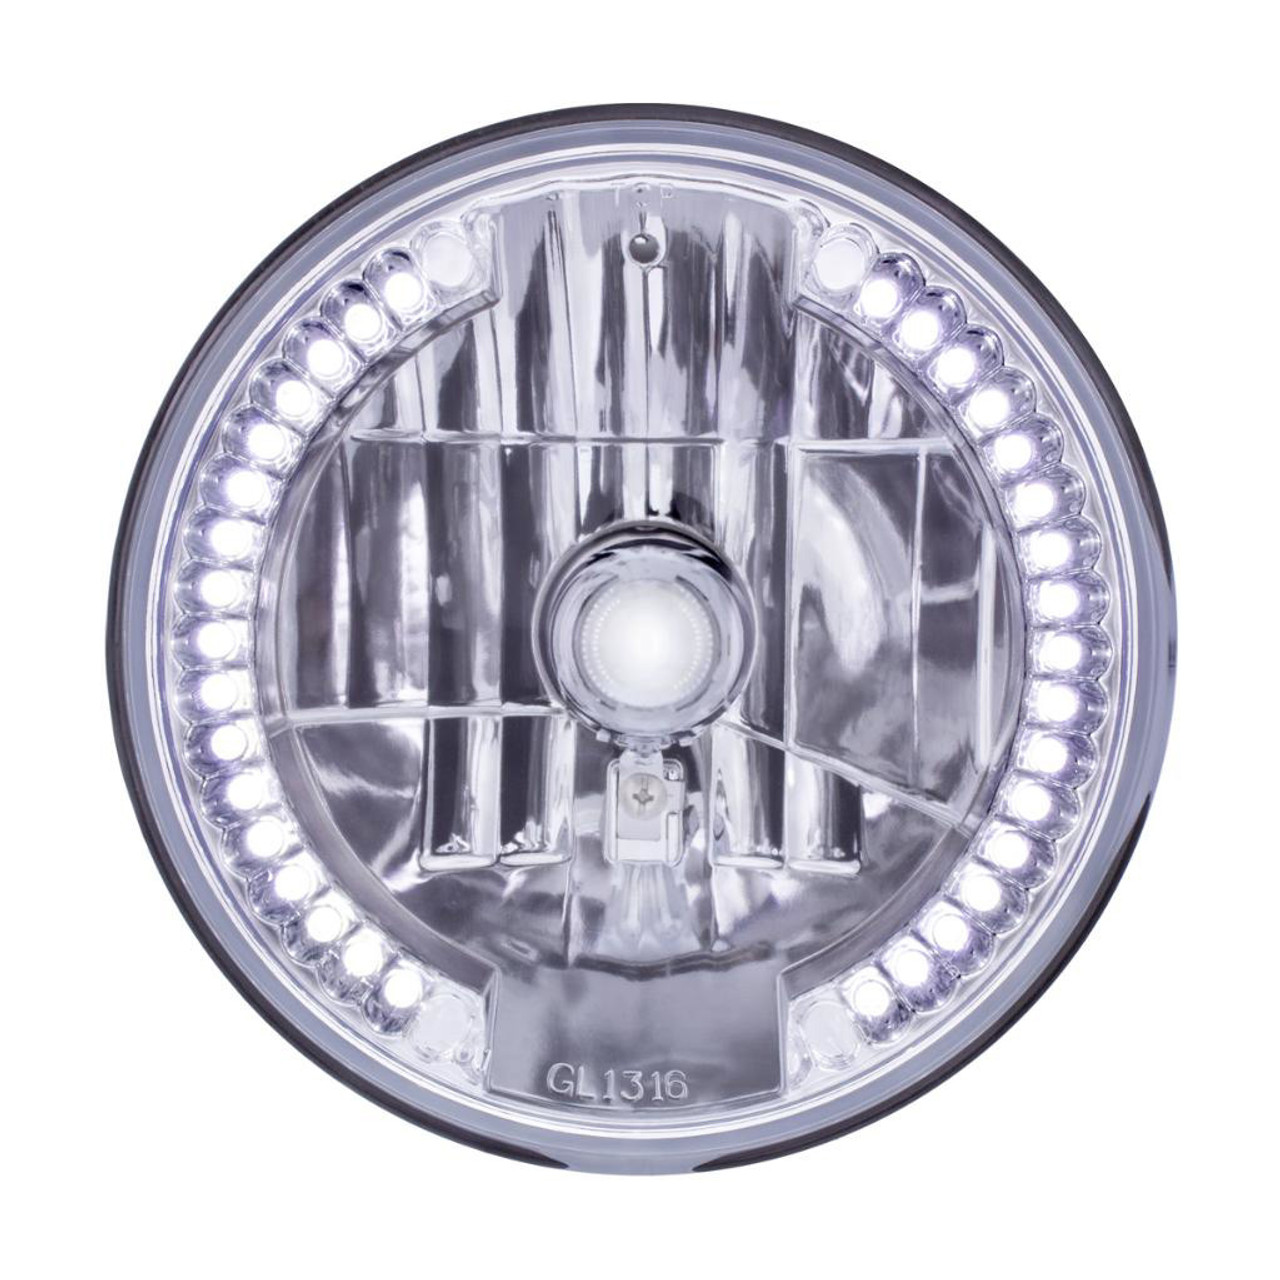 ULTRALIT - 7" CRYSTAL HEADLIGHT WITH 34 WHITE LED POSITION LIGHT.